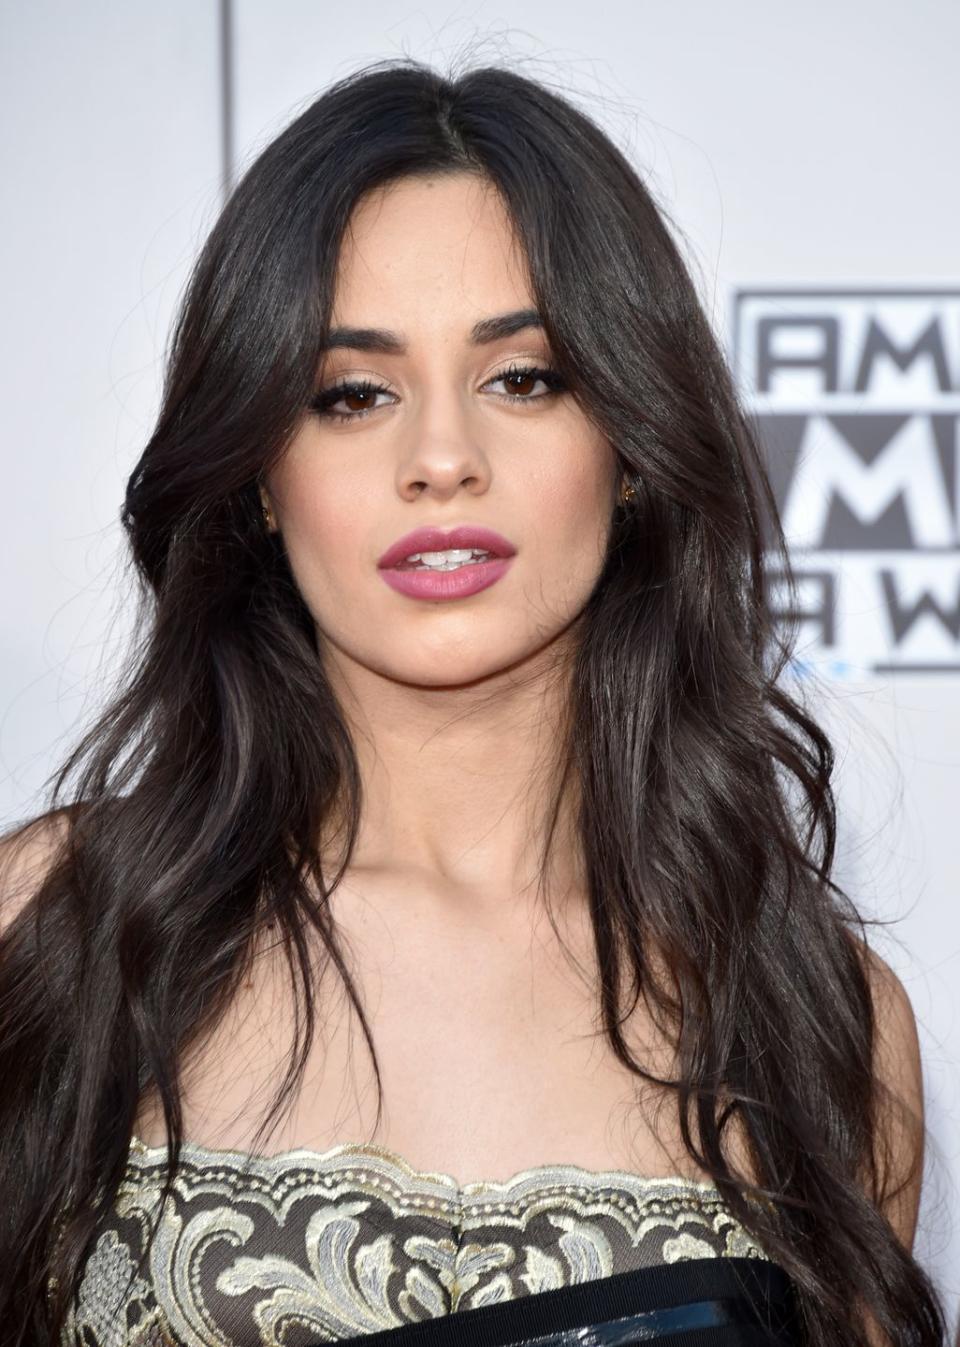 <p>Camila Cabello was one of the contestants on the U.S. version of <em>The X Factor. </em>Even though she was eliminated, she was brought back to form the girl group Fifth Harmony, just like One Direction in the U.K. version. She left the group in 2016 and put out hits like "Havana" and "Señorita," so she's doing just fine.</p>